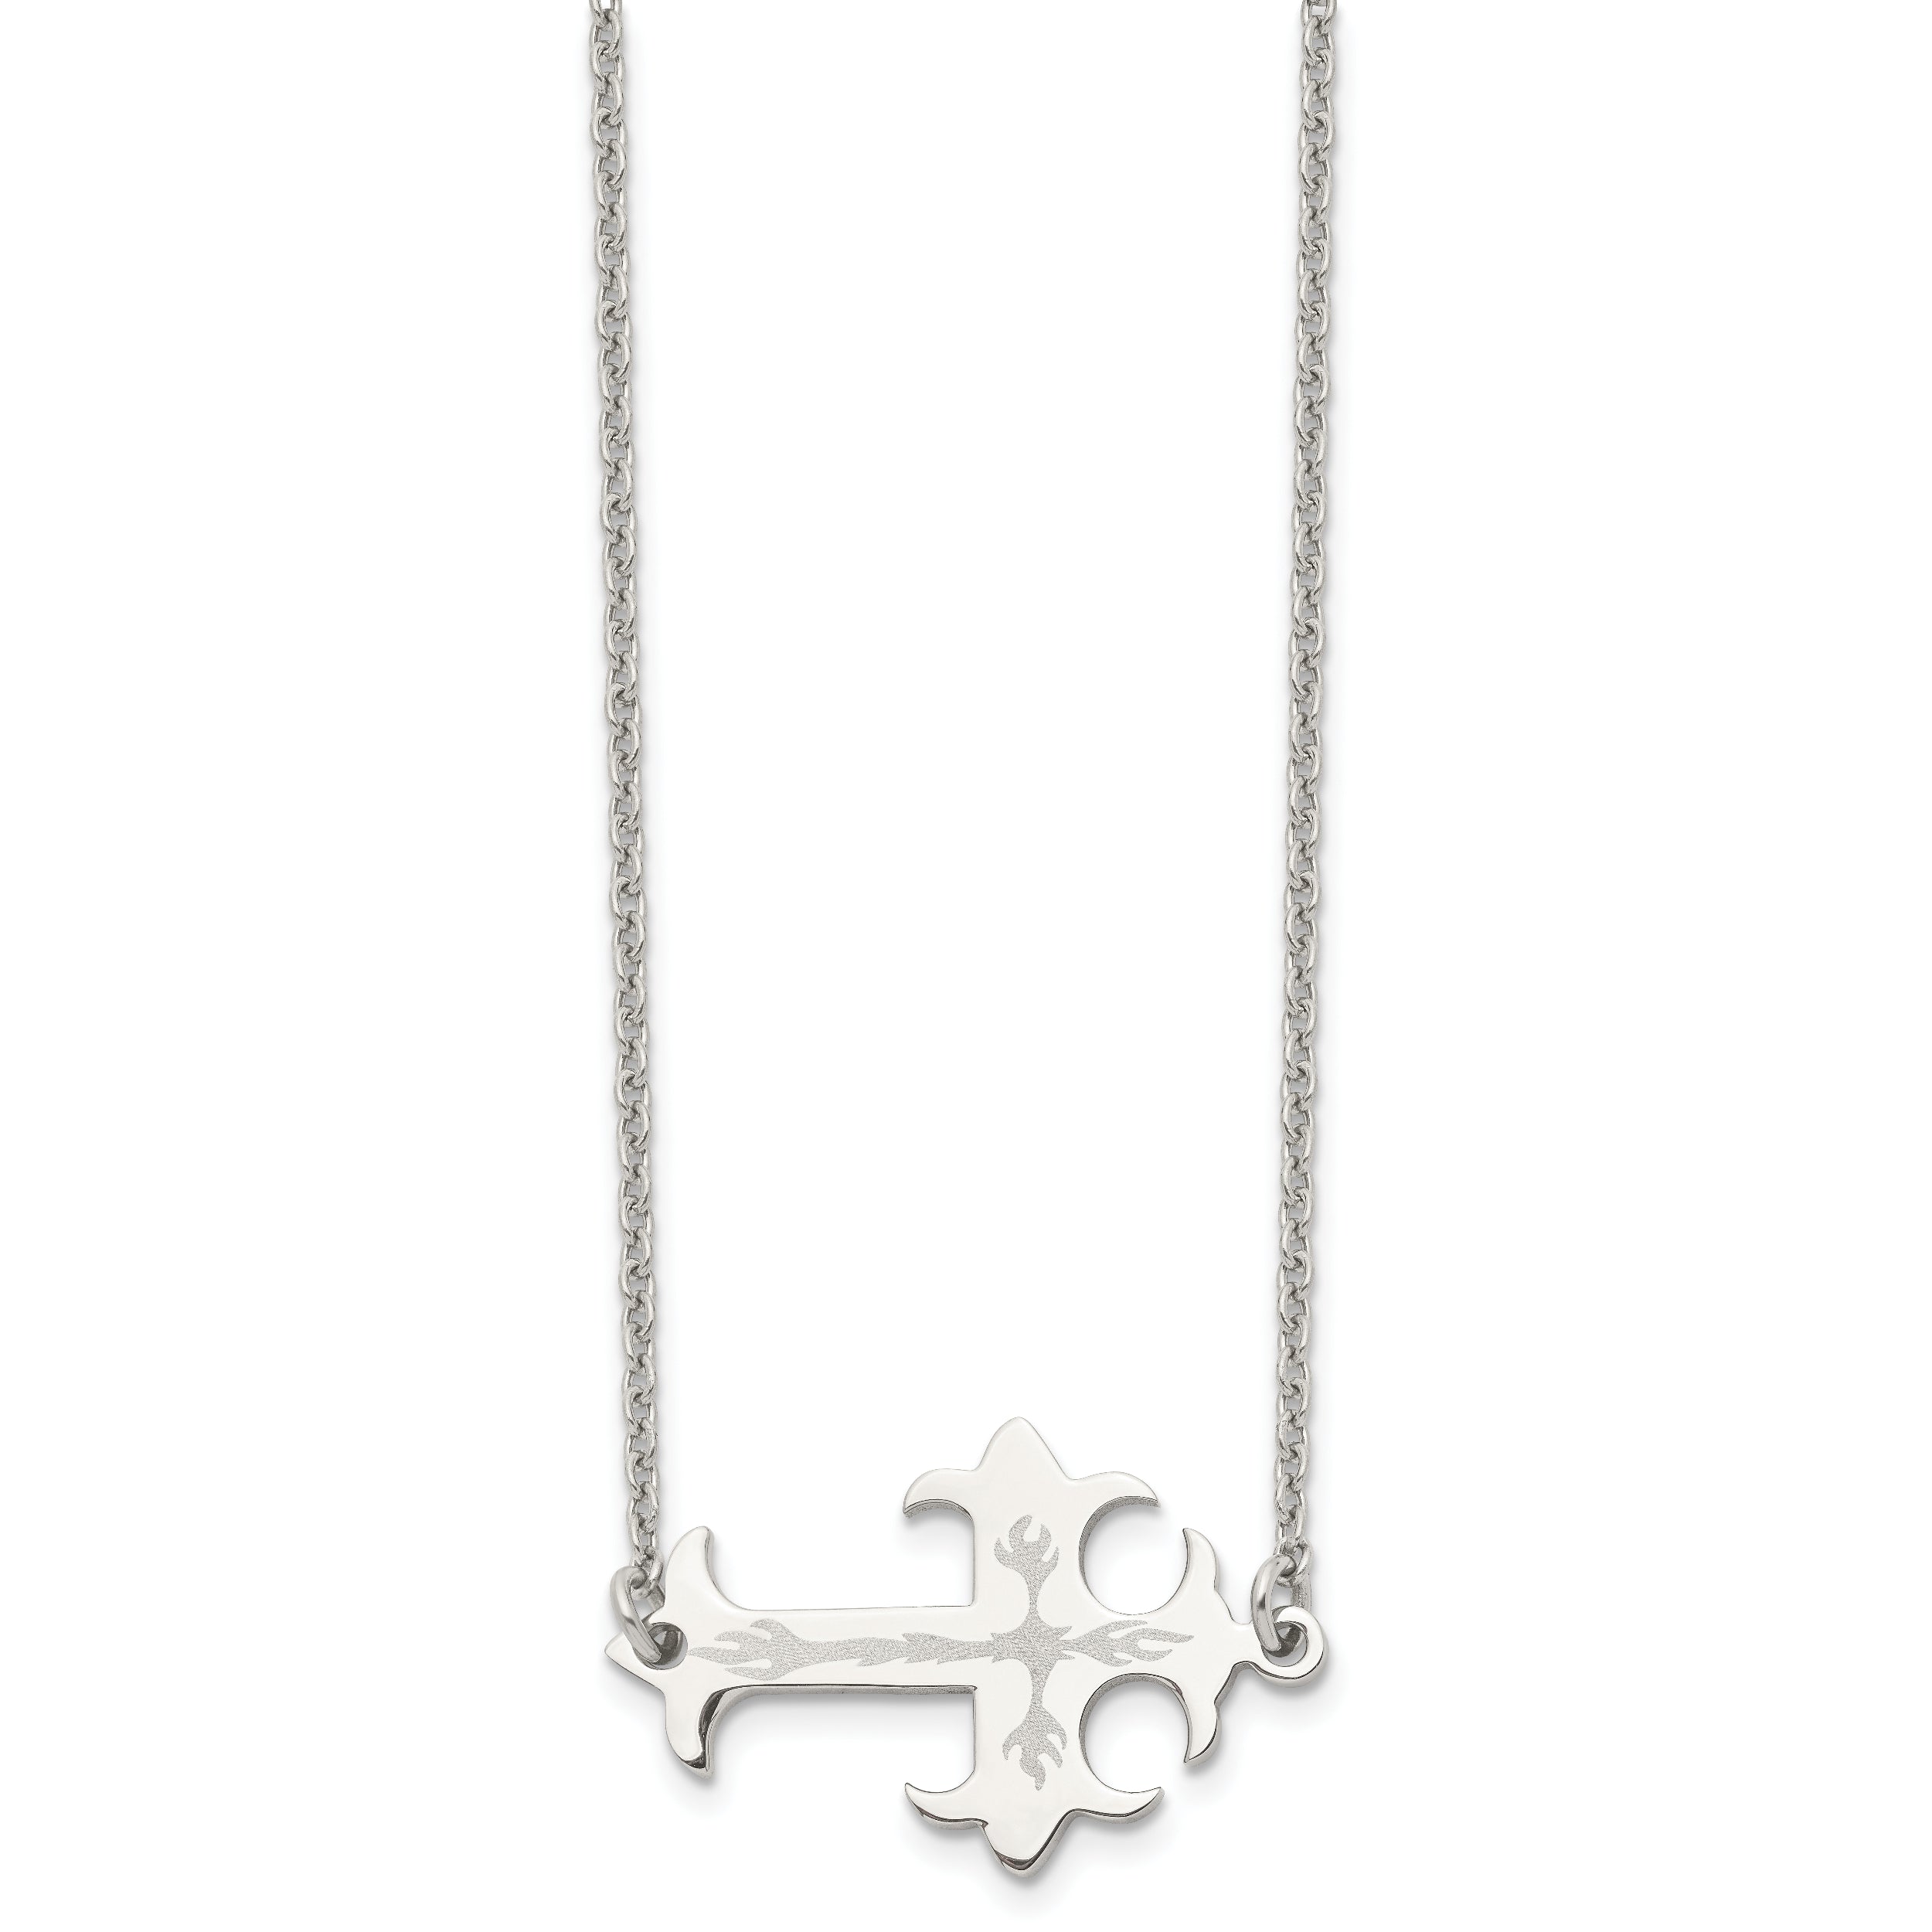 Chisel Stainless Steel Brushed and Polished Flame Design Sideways Cross on a 21 inch Cable Chain Necklace